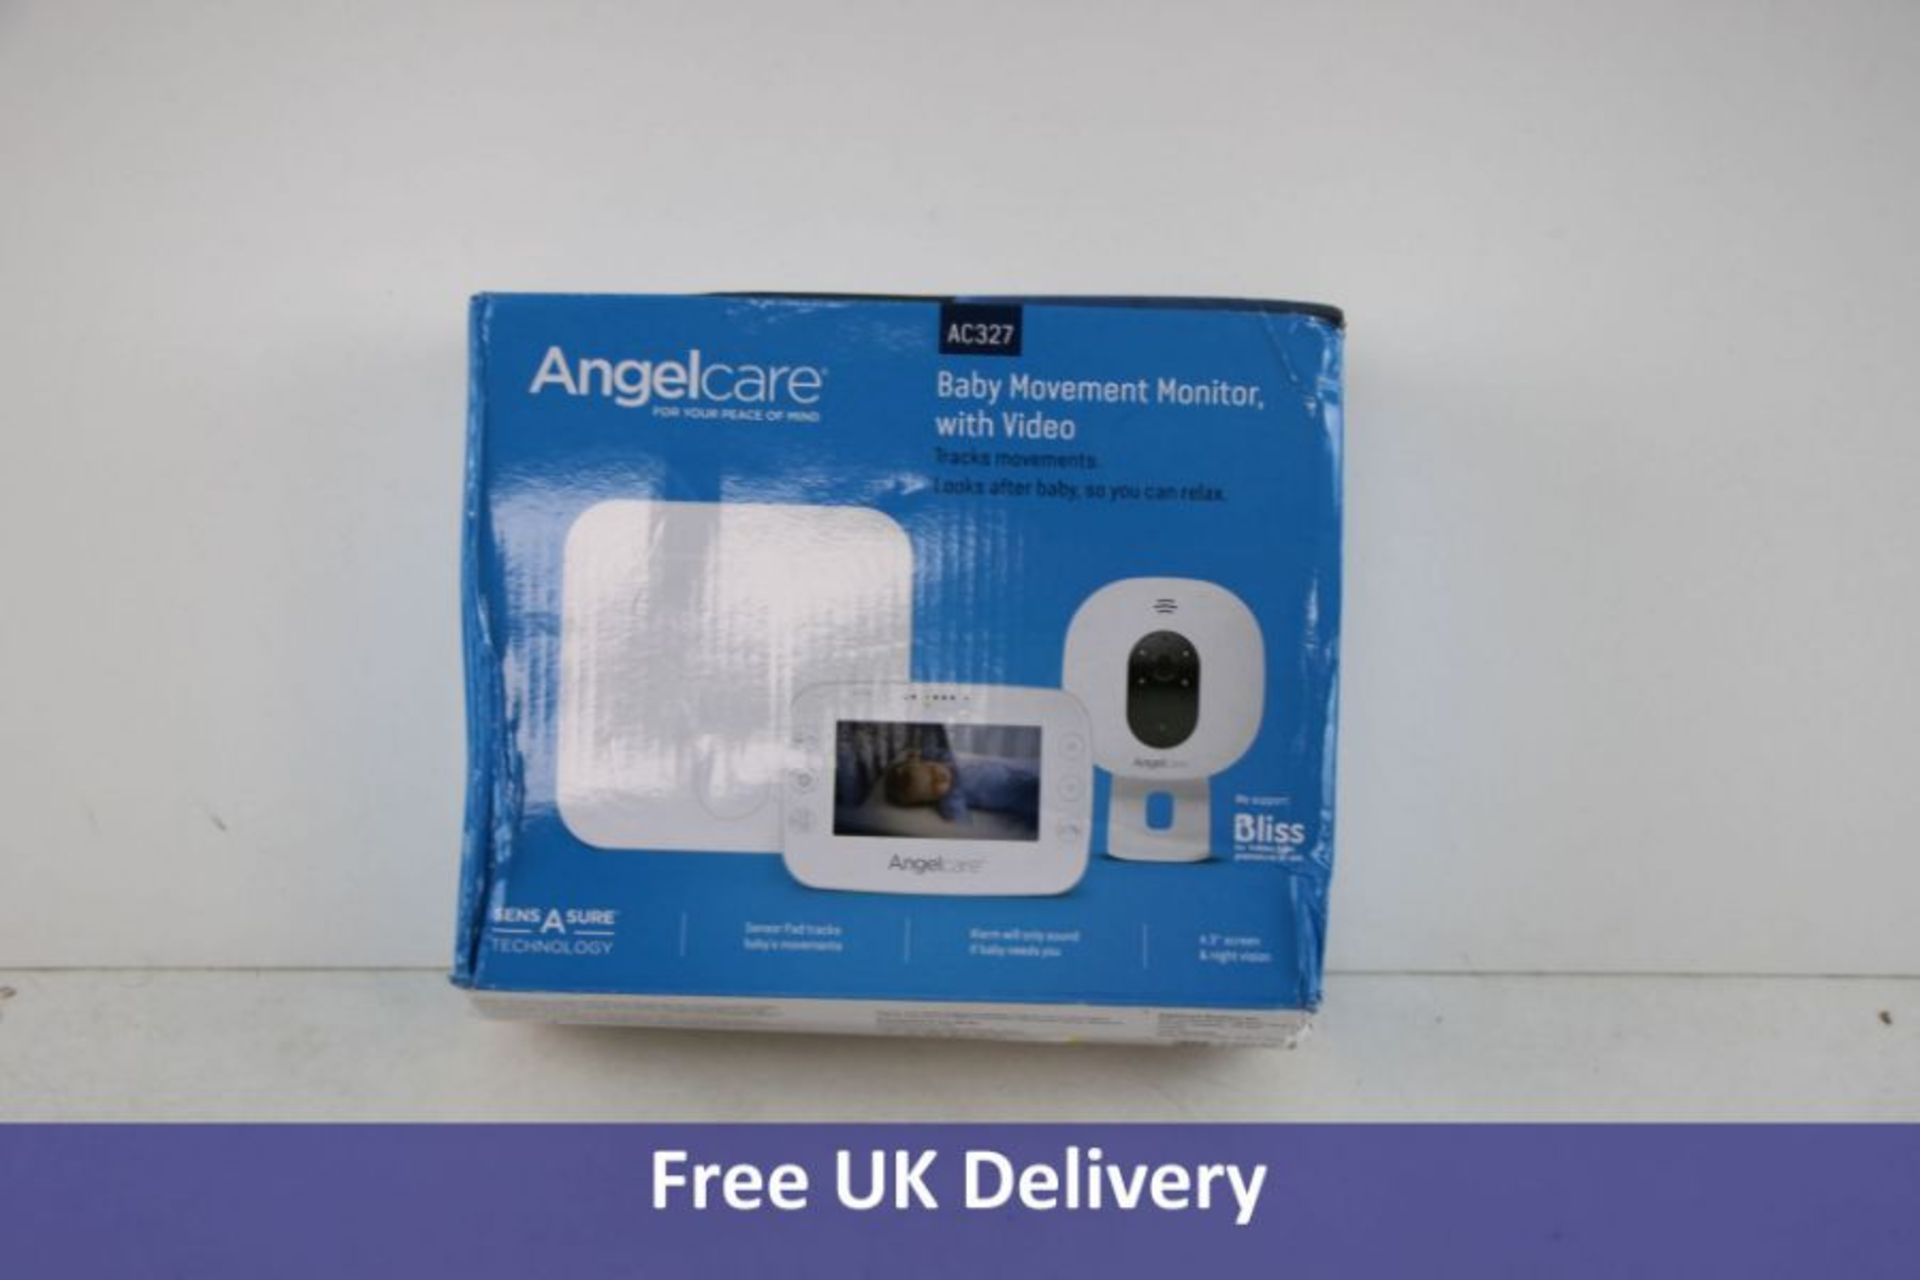 Angelcare AC327 Baby Movement Monitor with Video